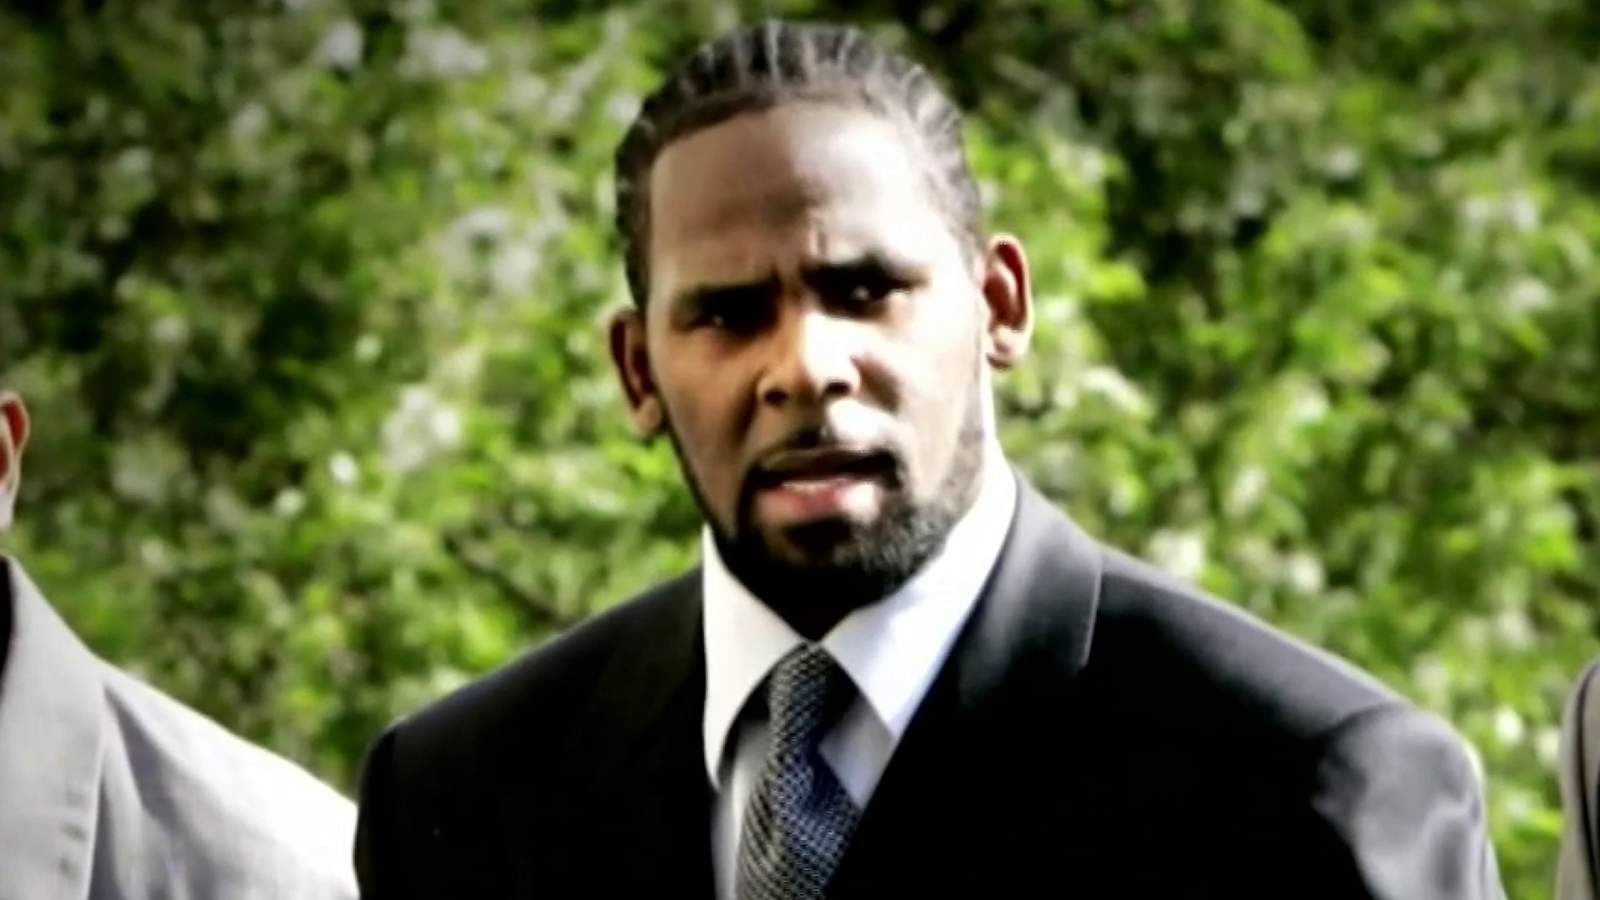 Google search records lead to arrest of R. Kelly associate for arson, witness tampering